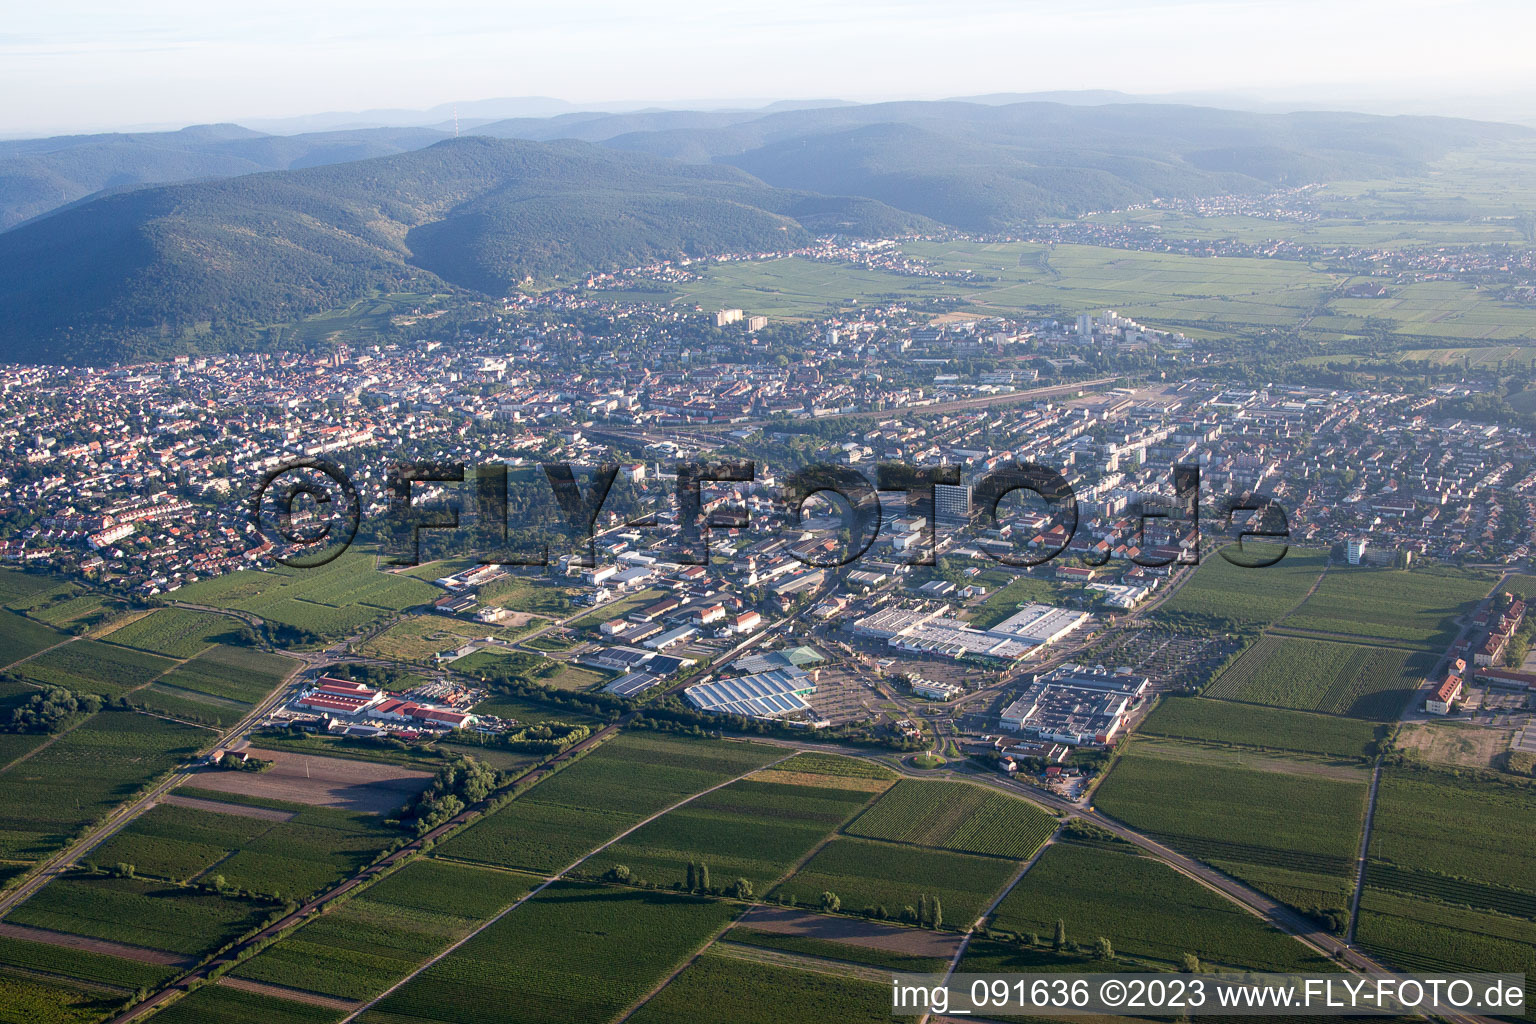 Aerial photograpy of Neustadt an der Weinstraße in the state Rhineland-Palatinate, Germany